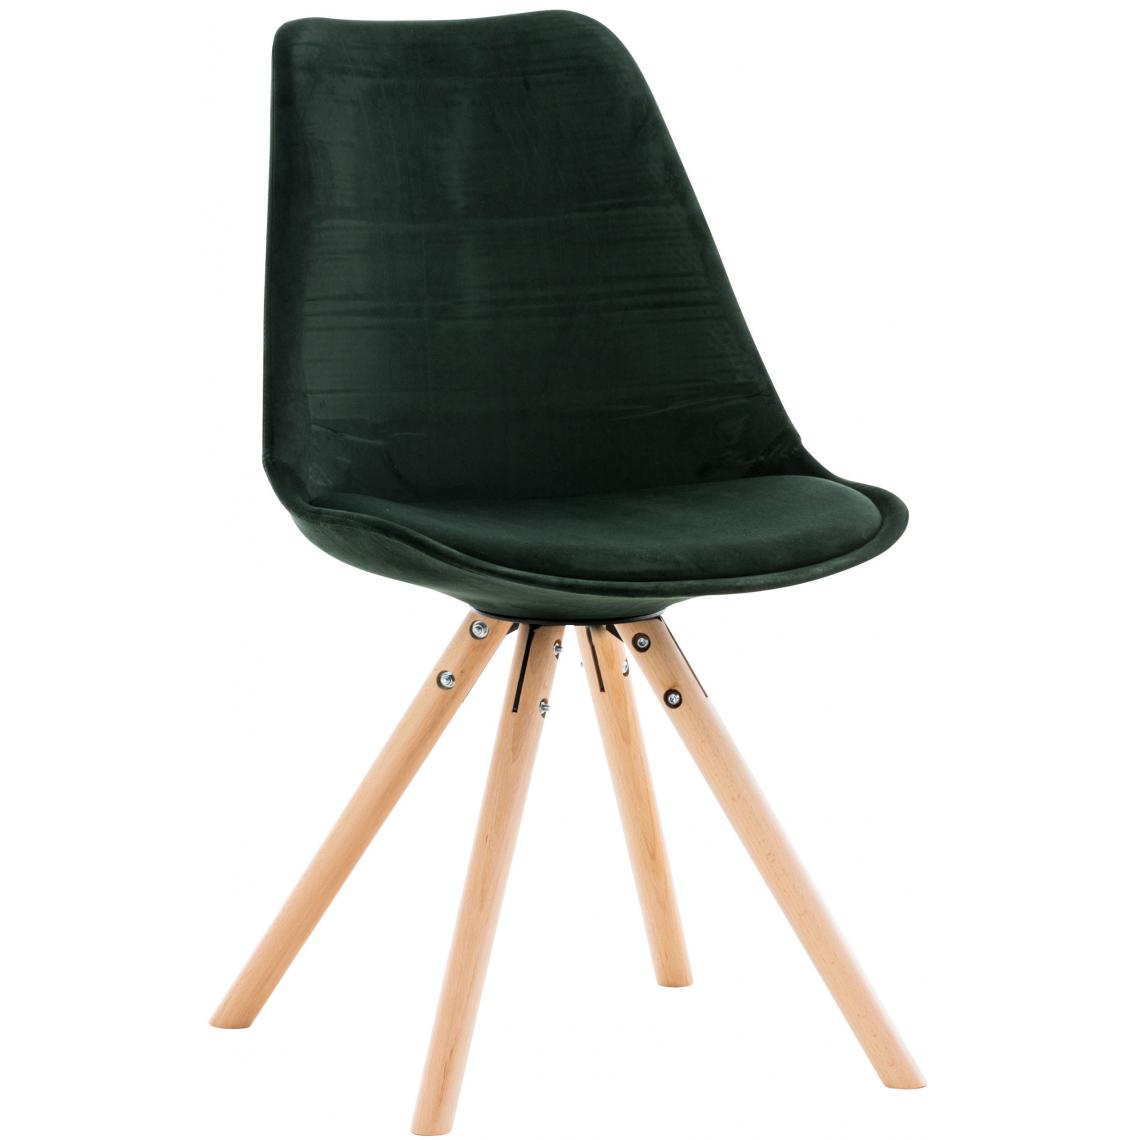 Icaverne - Admirable Chaise ronde en velours reference Manille naturel couleur vert - Chaises